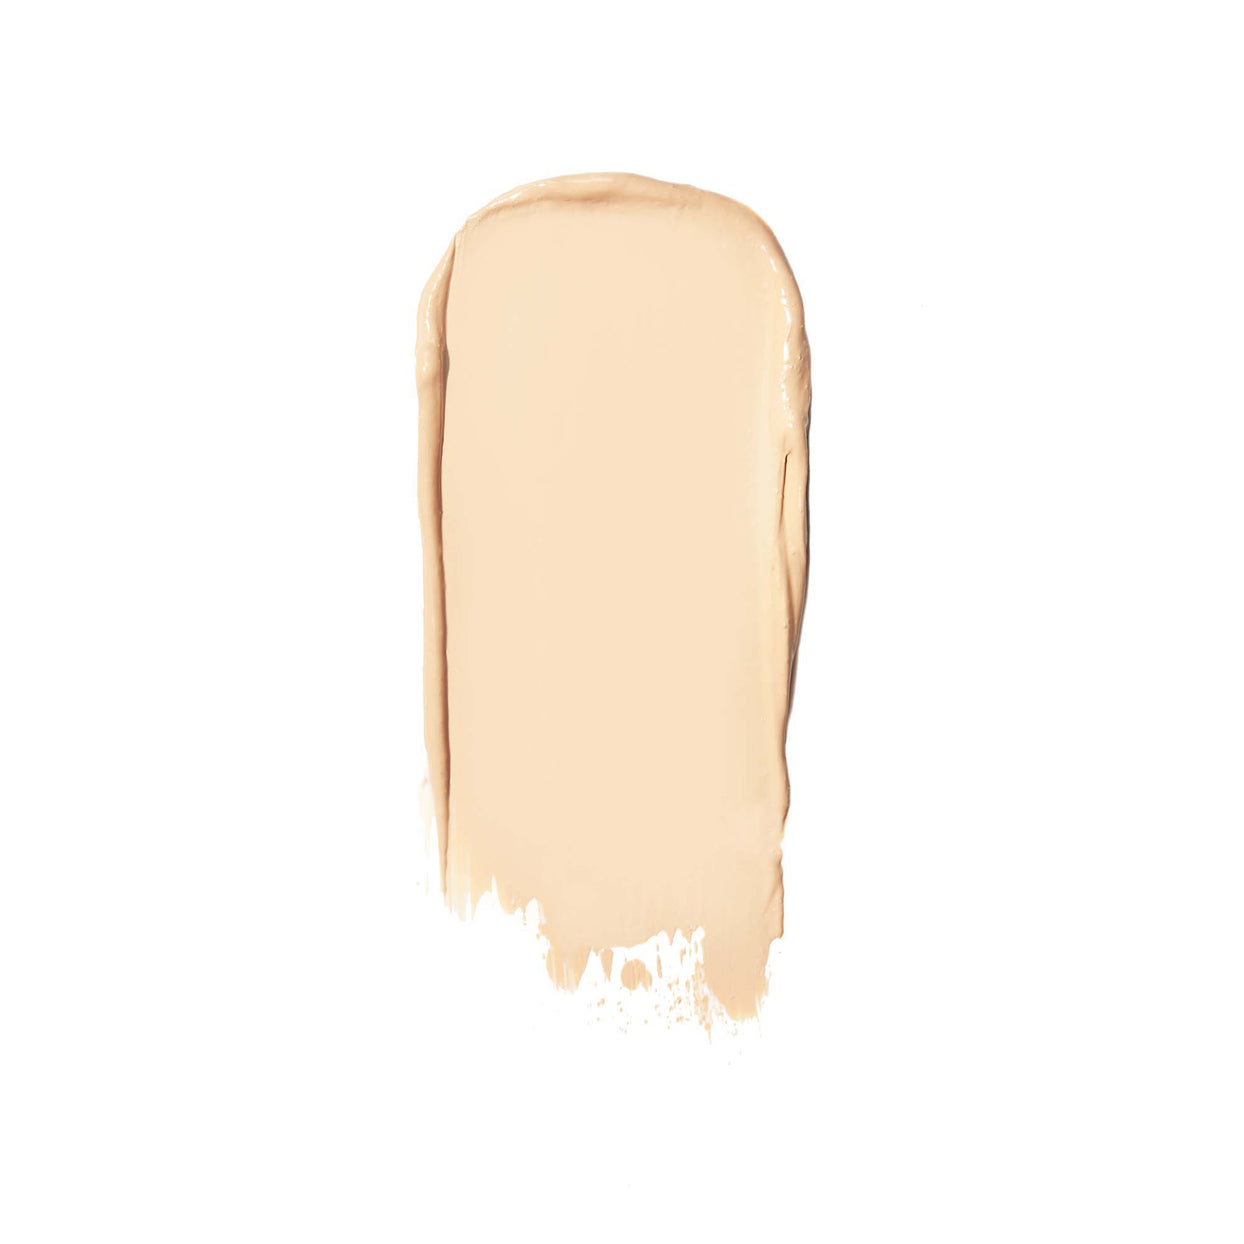 UnCover-Up Cream Foundation